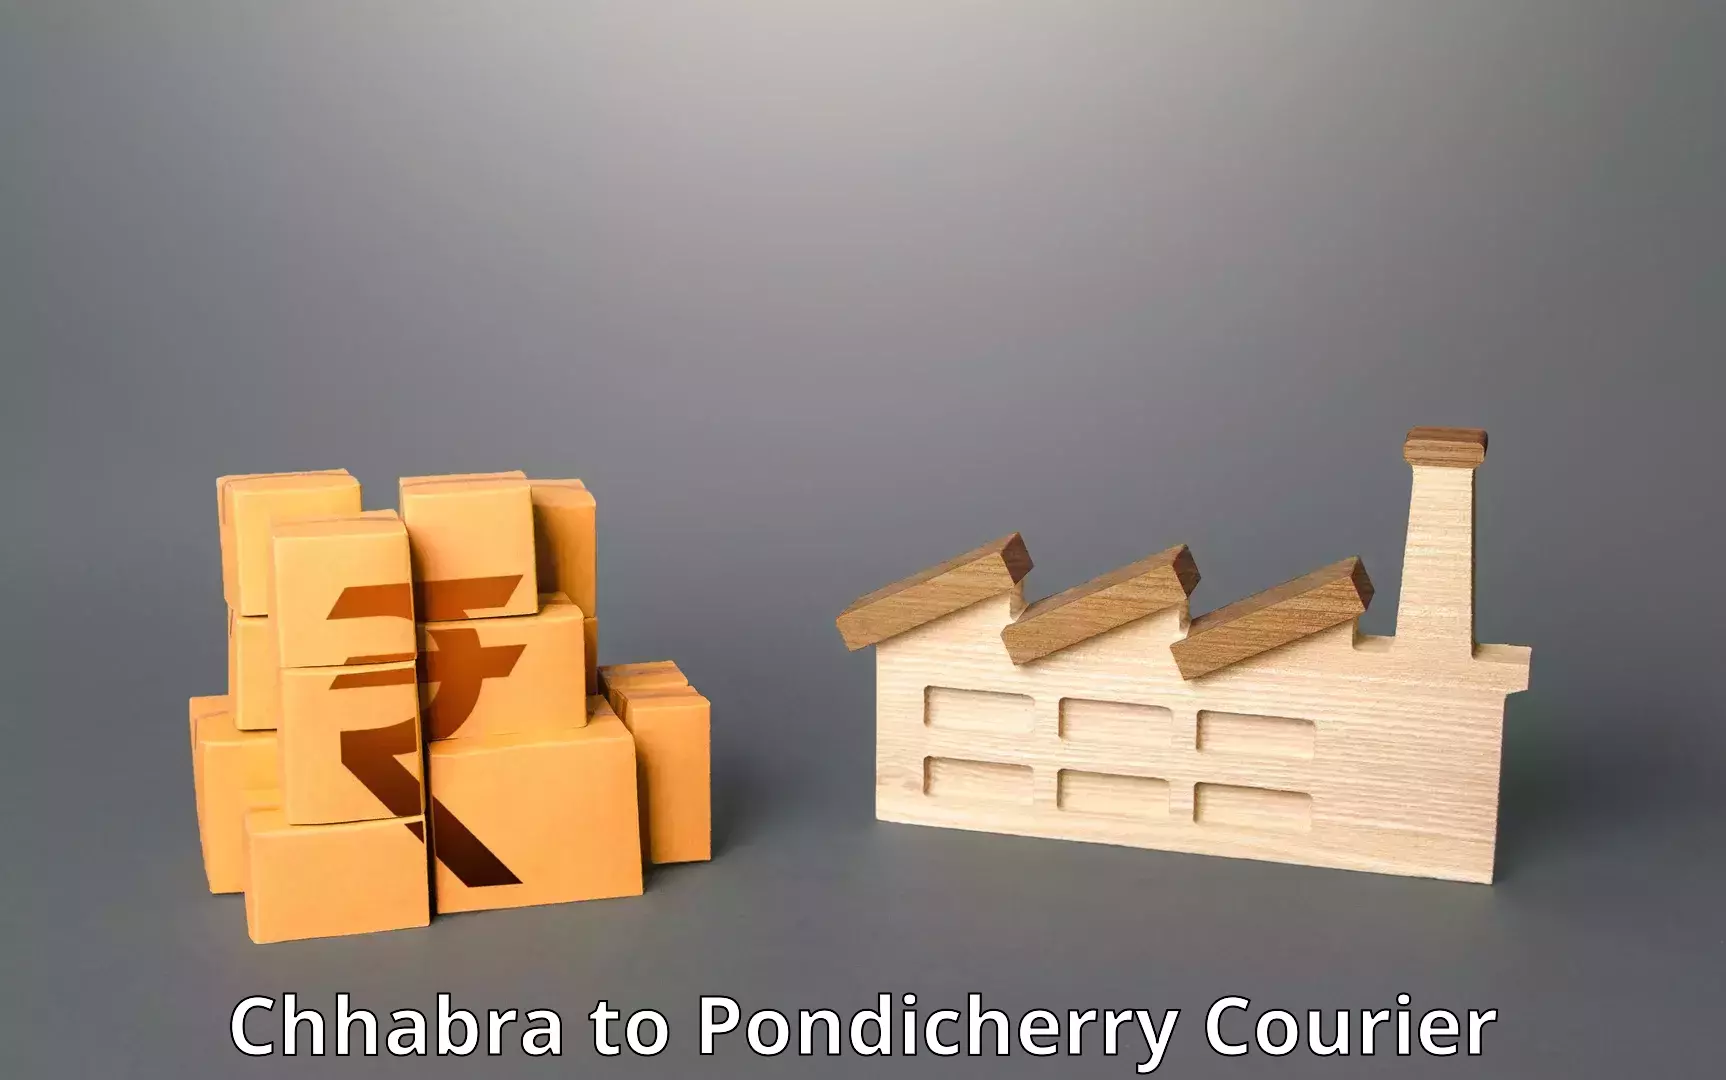 State-of-the-art courier technology Chhabra to Pondicherry